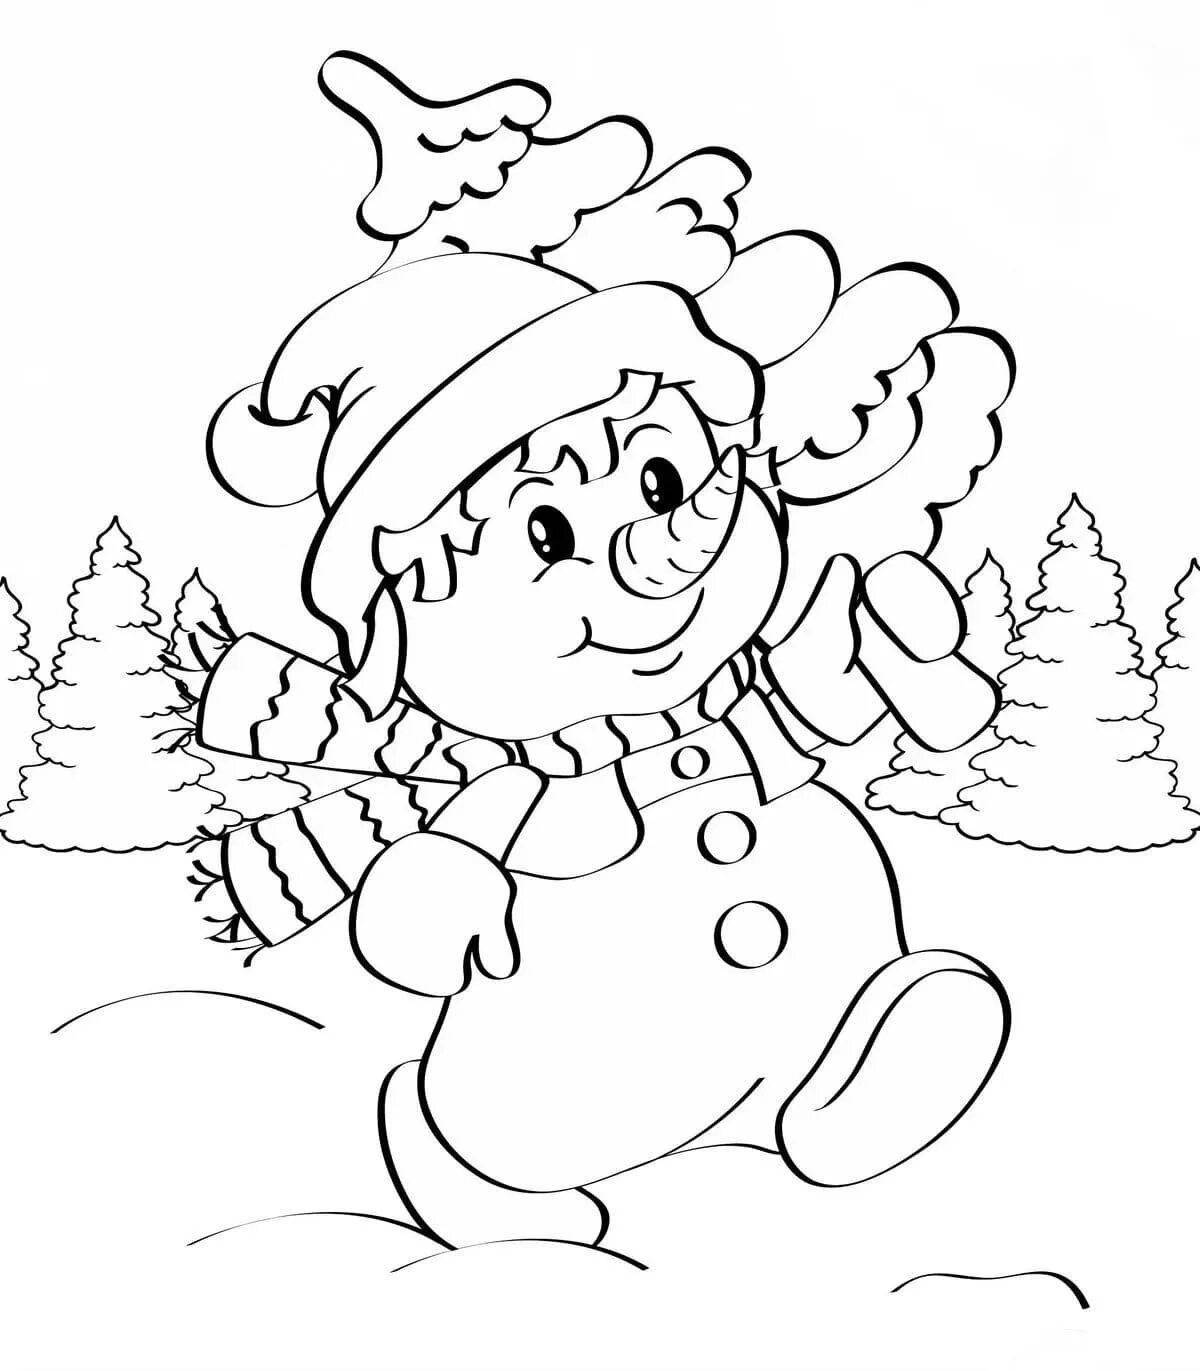 Humorous coloring book snowman for children 5 years old